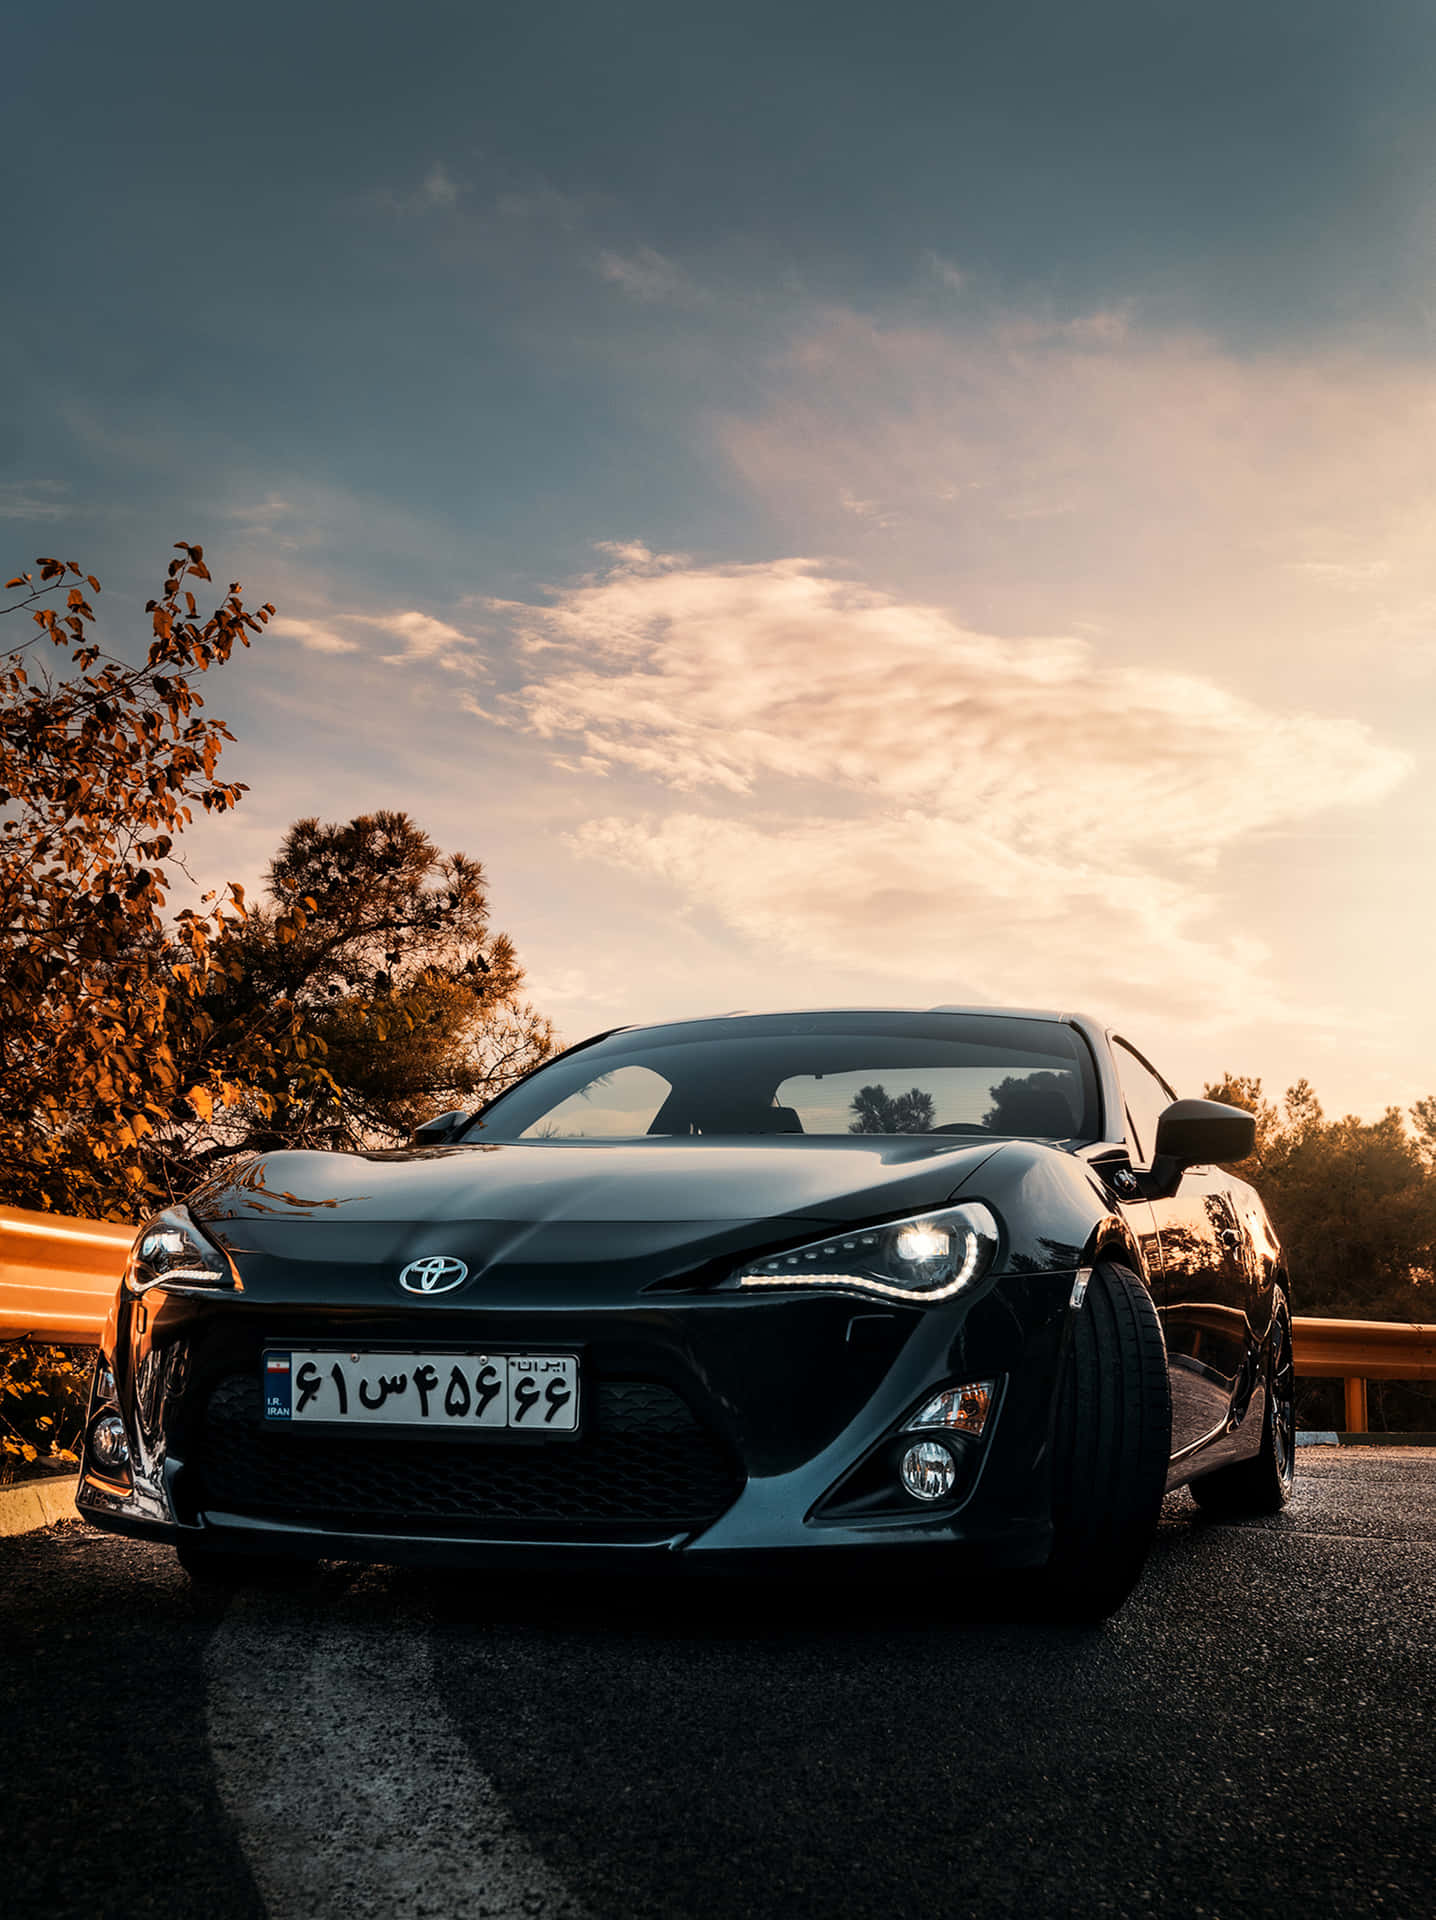 An Iconic Sports Car - The Toyota 86 Wallpaper